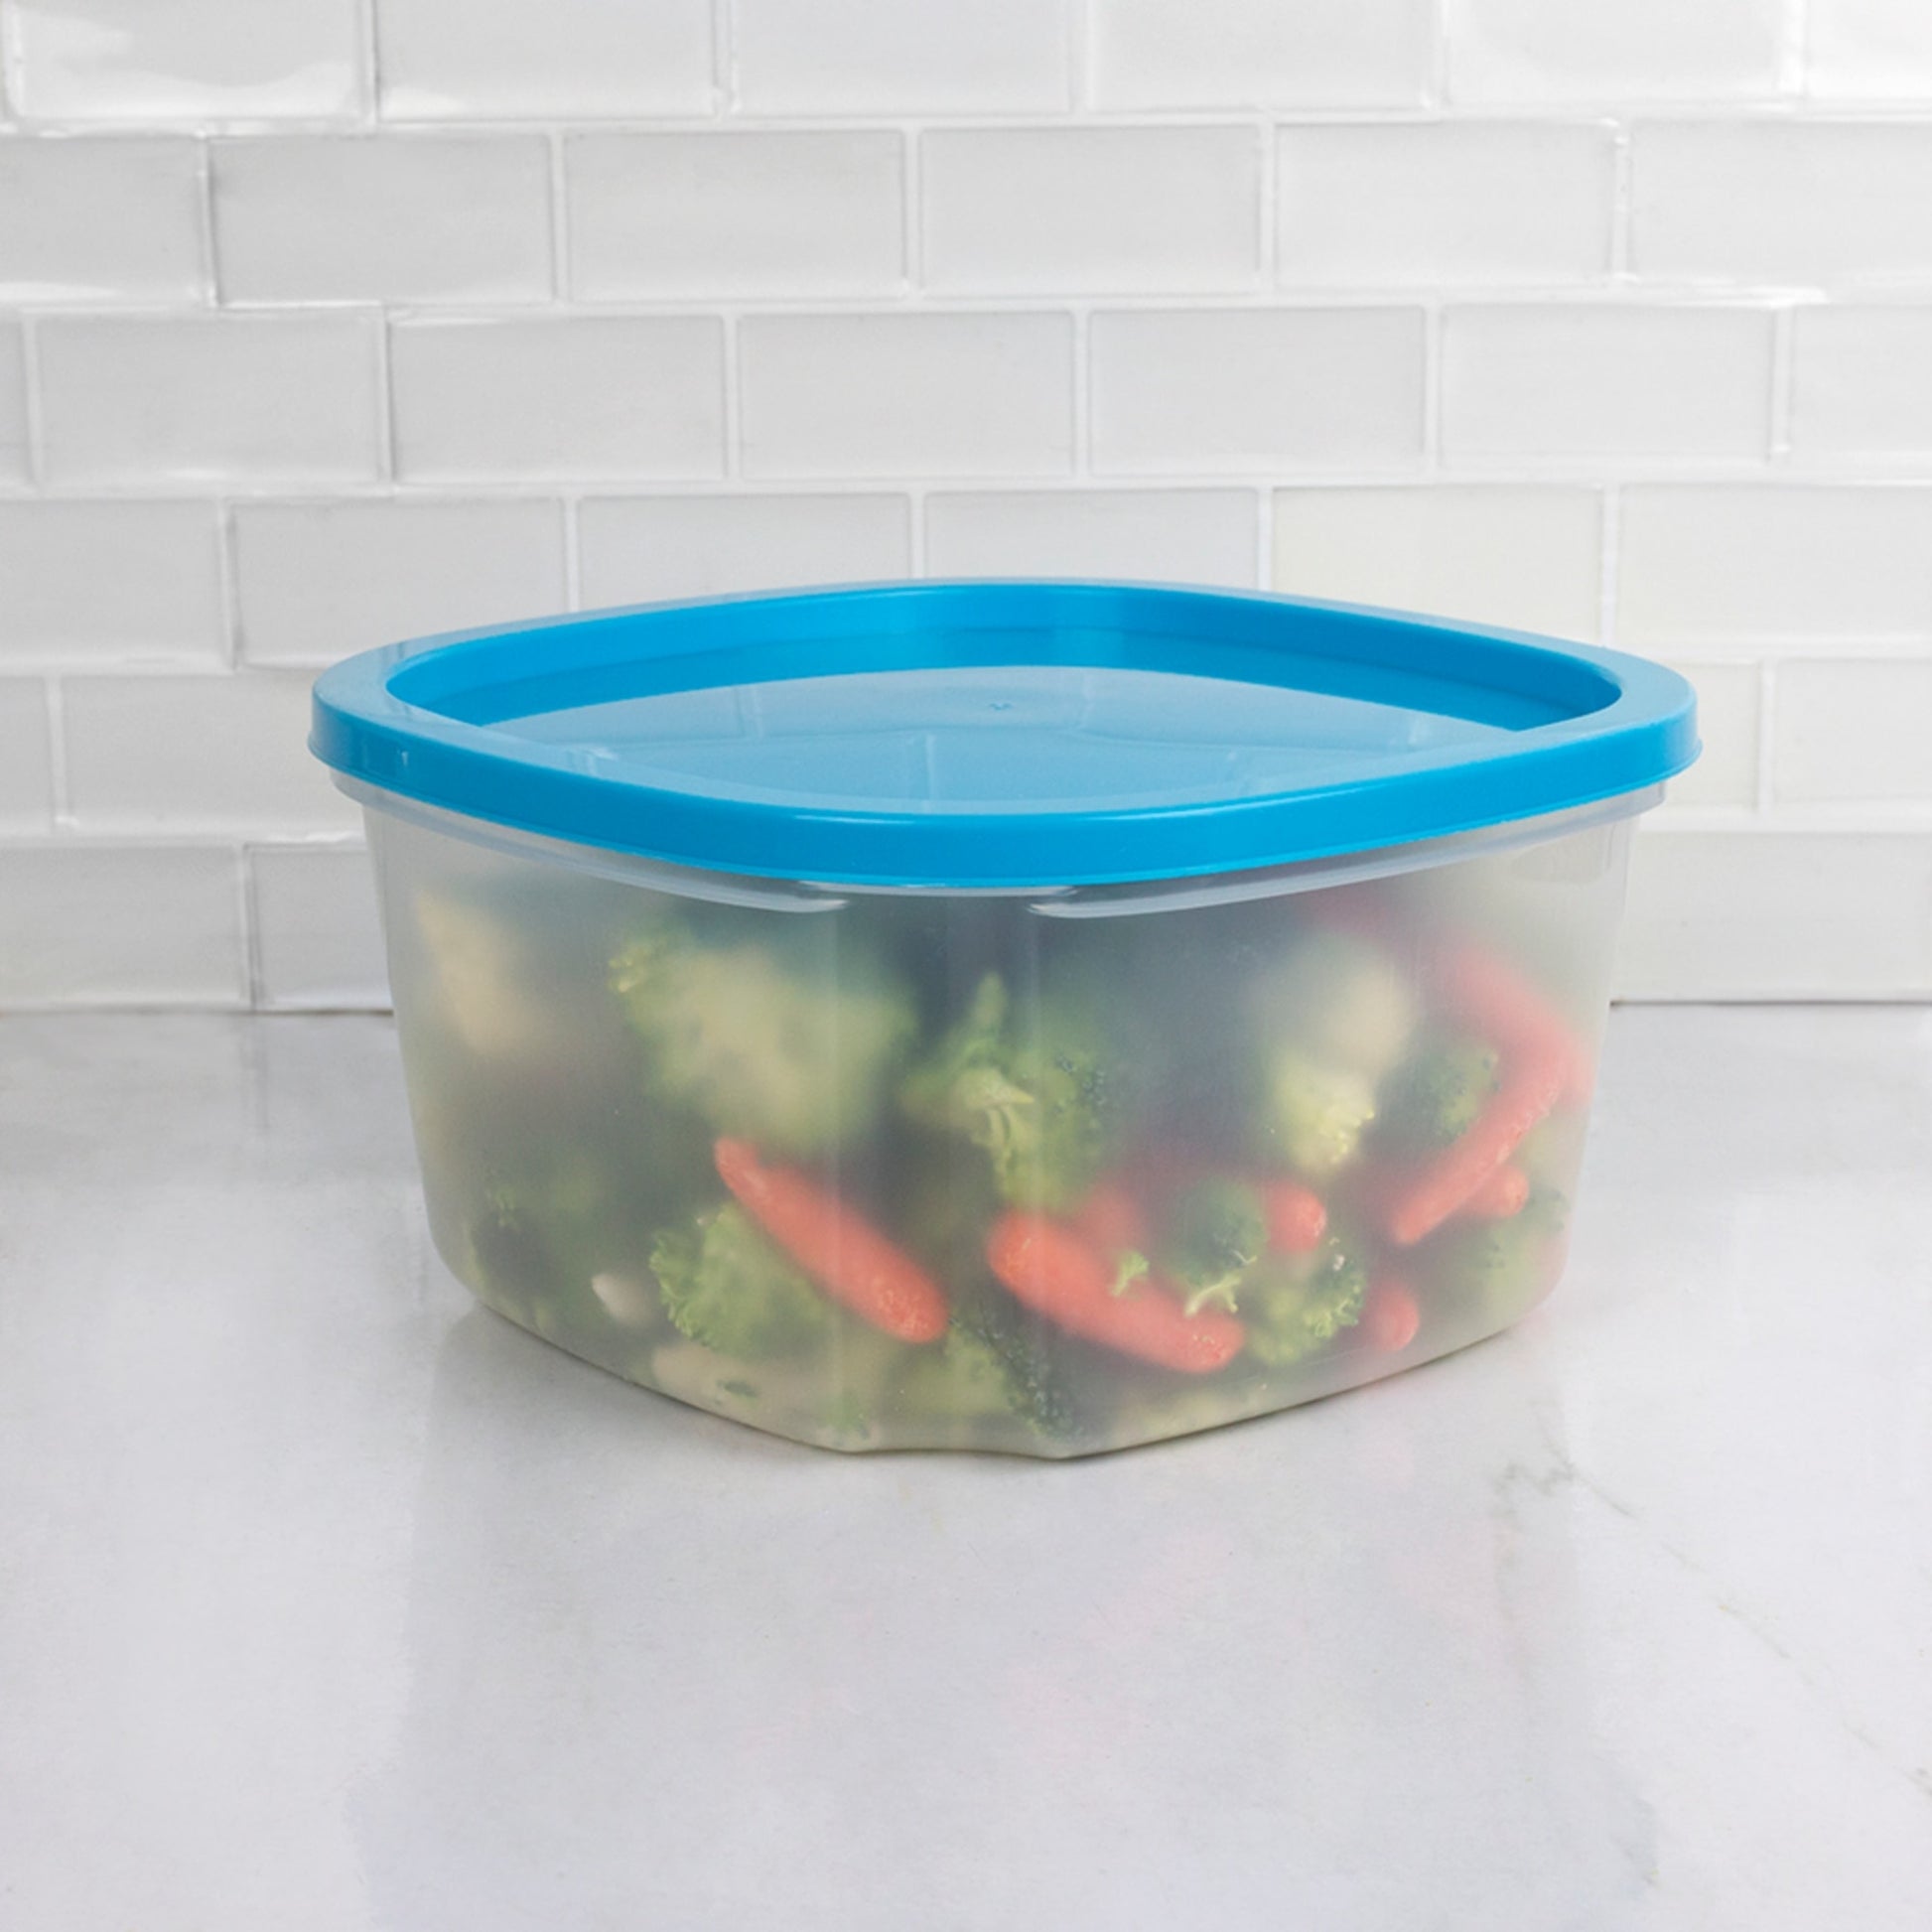 7 Piece Plastic Food Storage Container Set with Multi-Colored Lids, FOOD  PREP